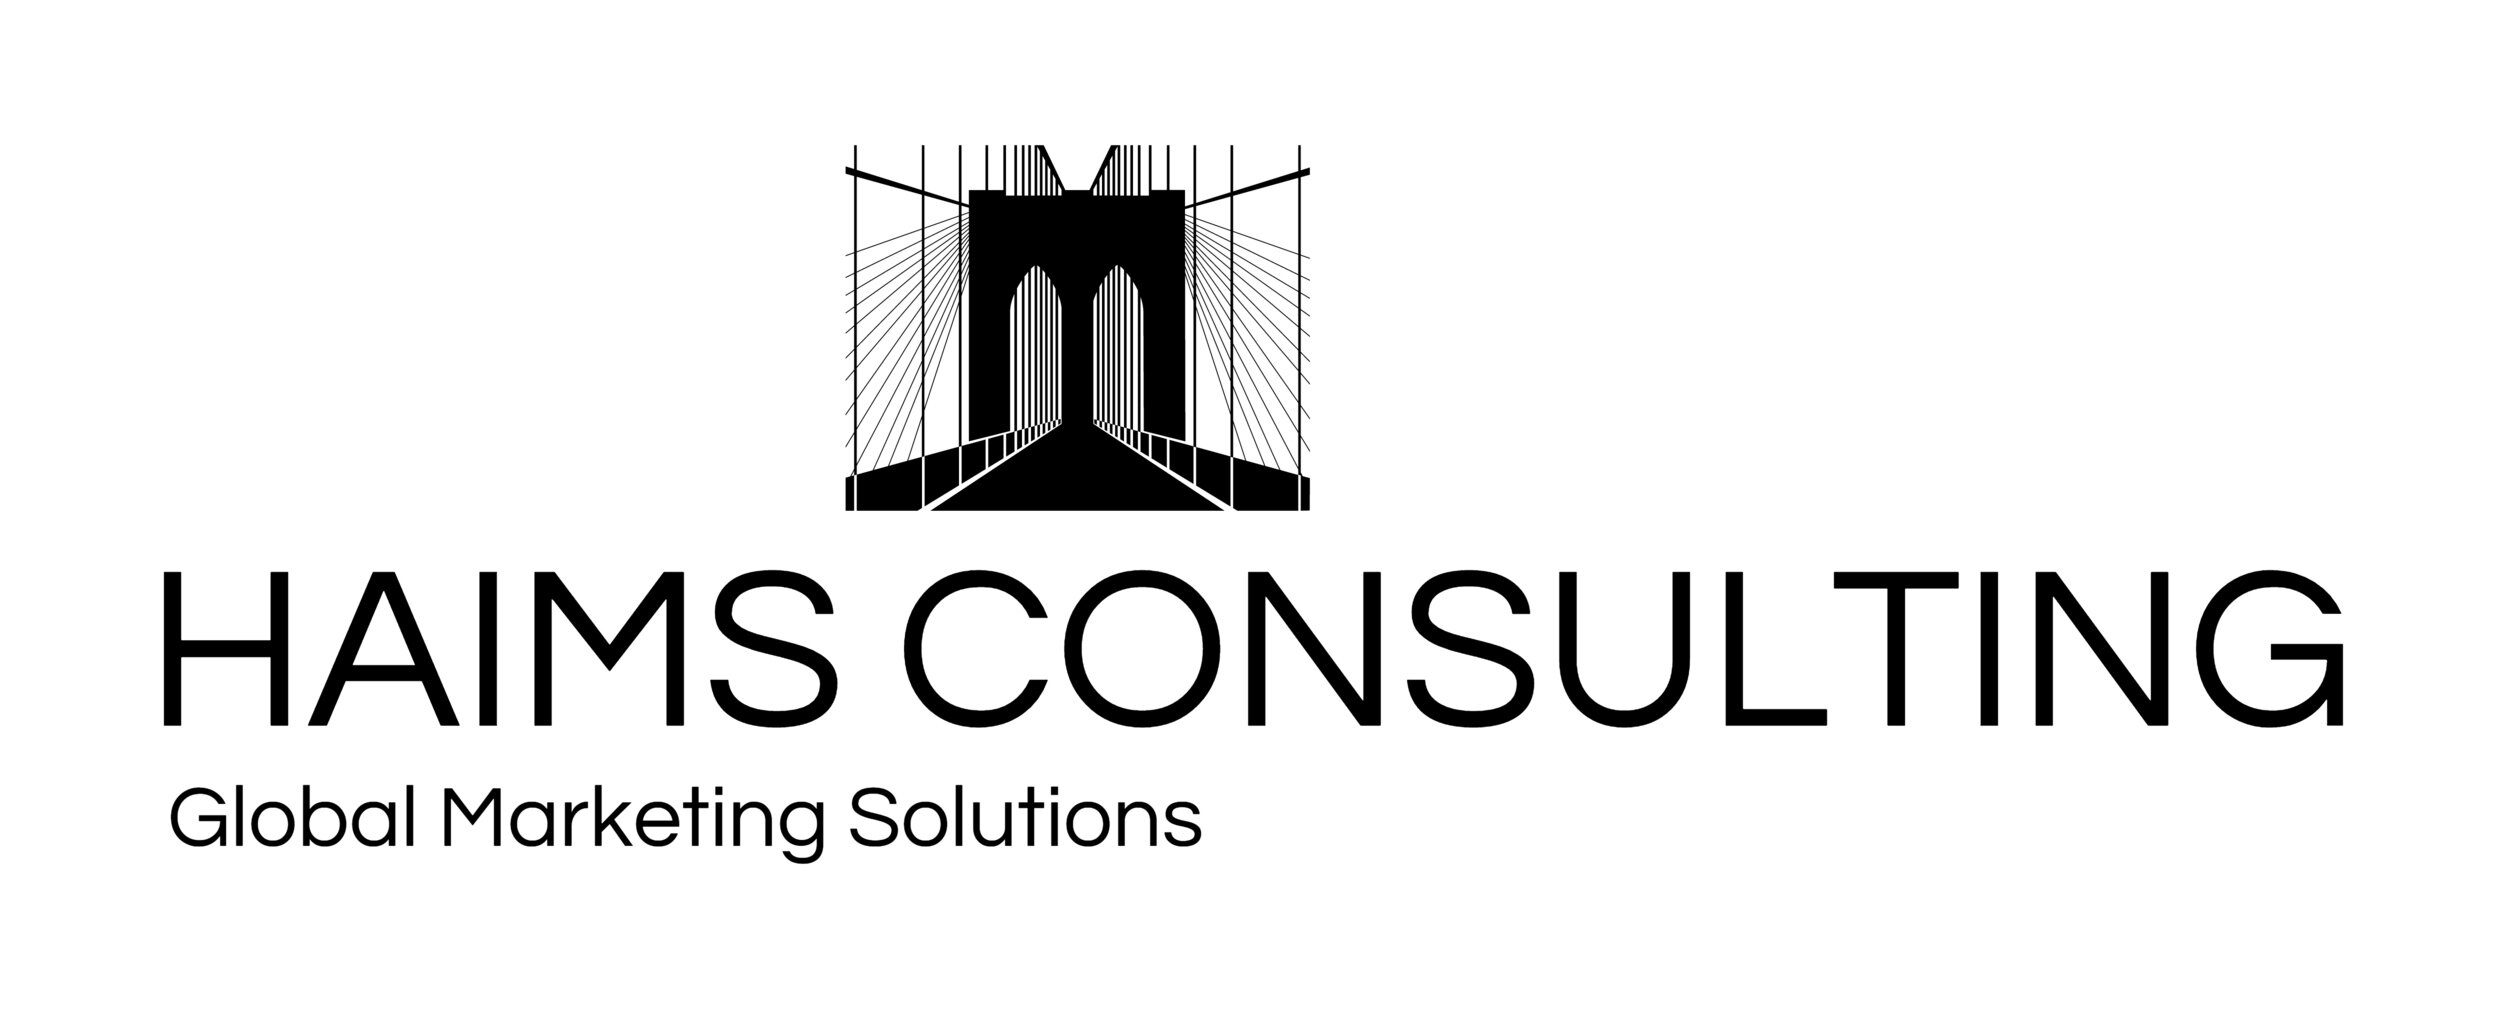 Haims Consulting